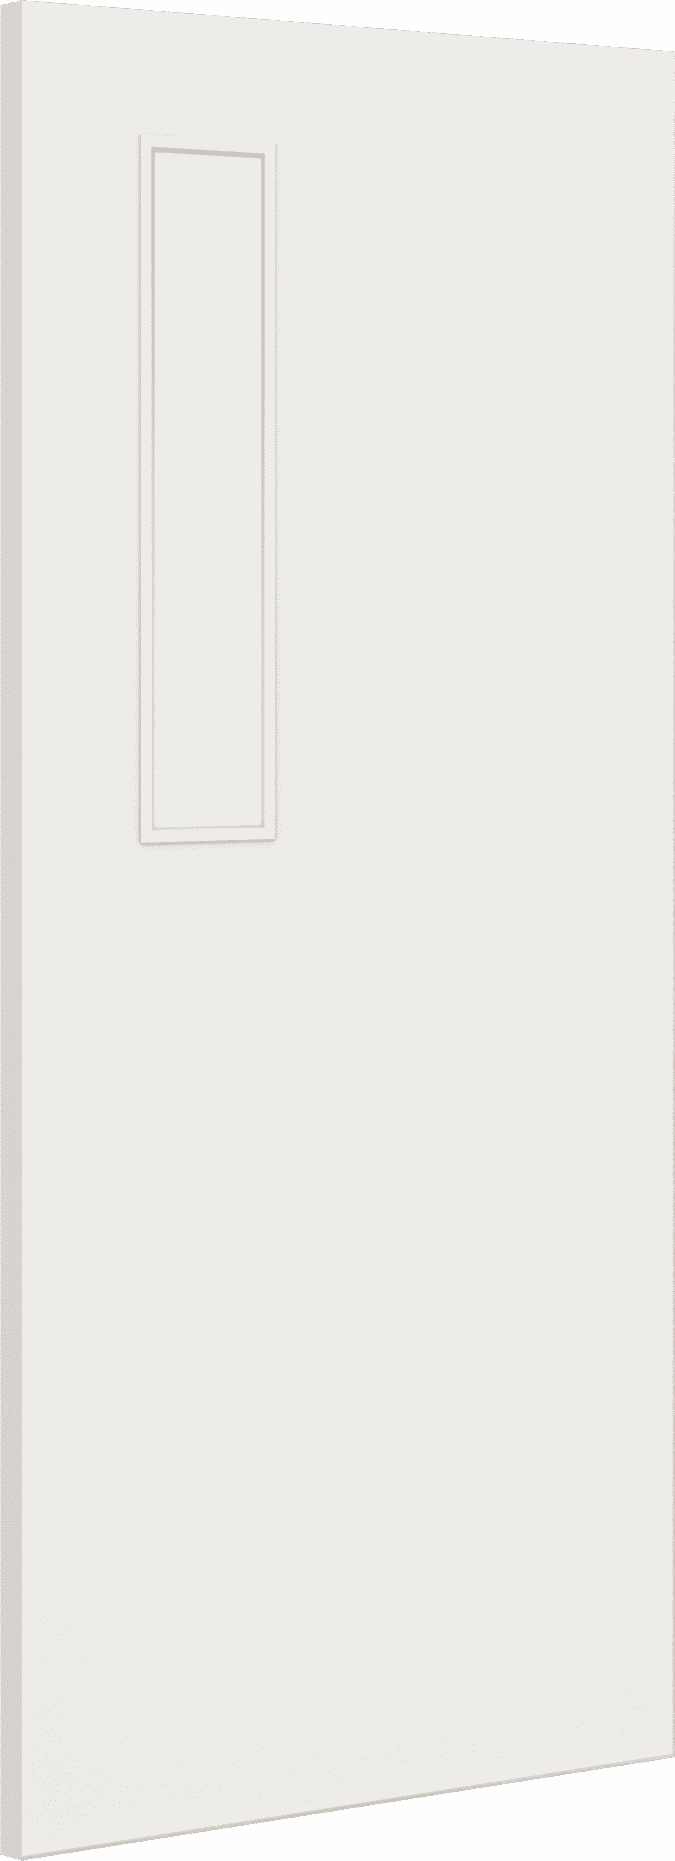 1981mm x 762mm x 44mm (30") Architectural Paint Grade White 08 Clear Glazed Fire Door Blank